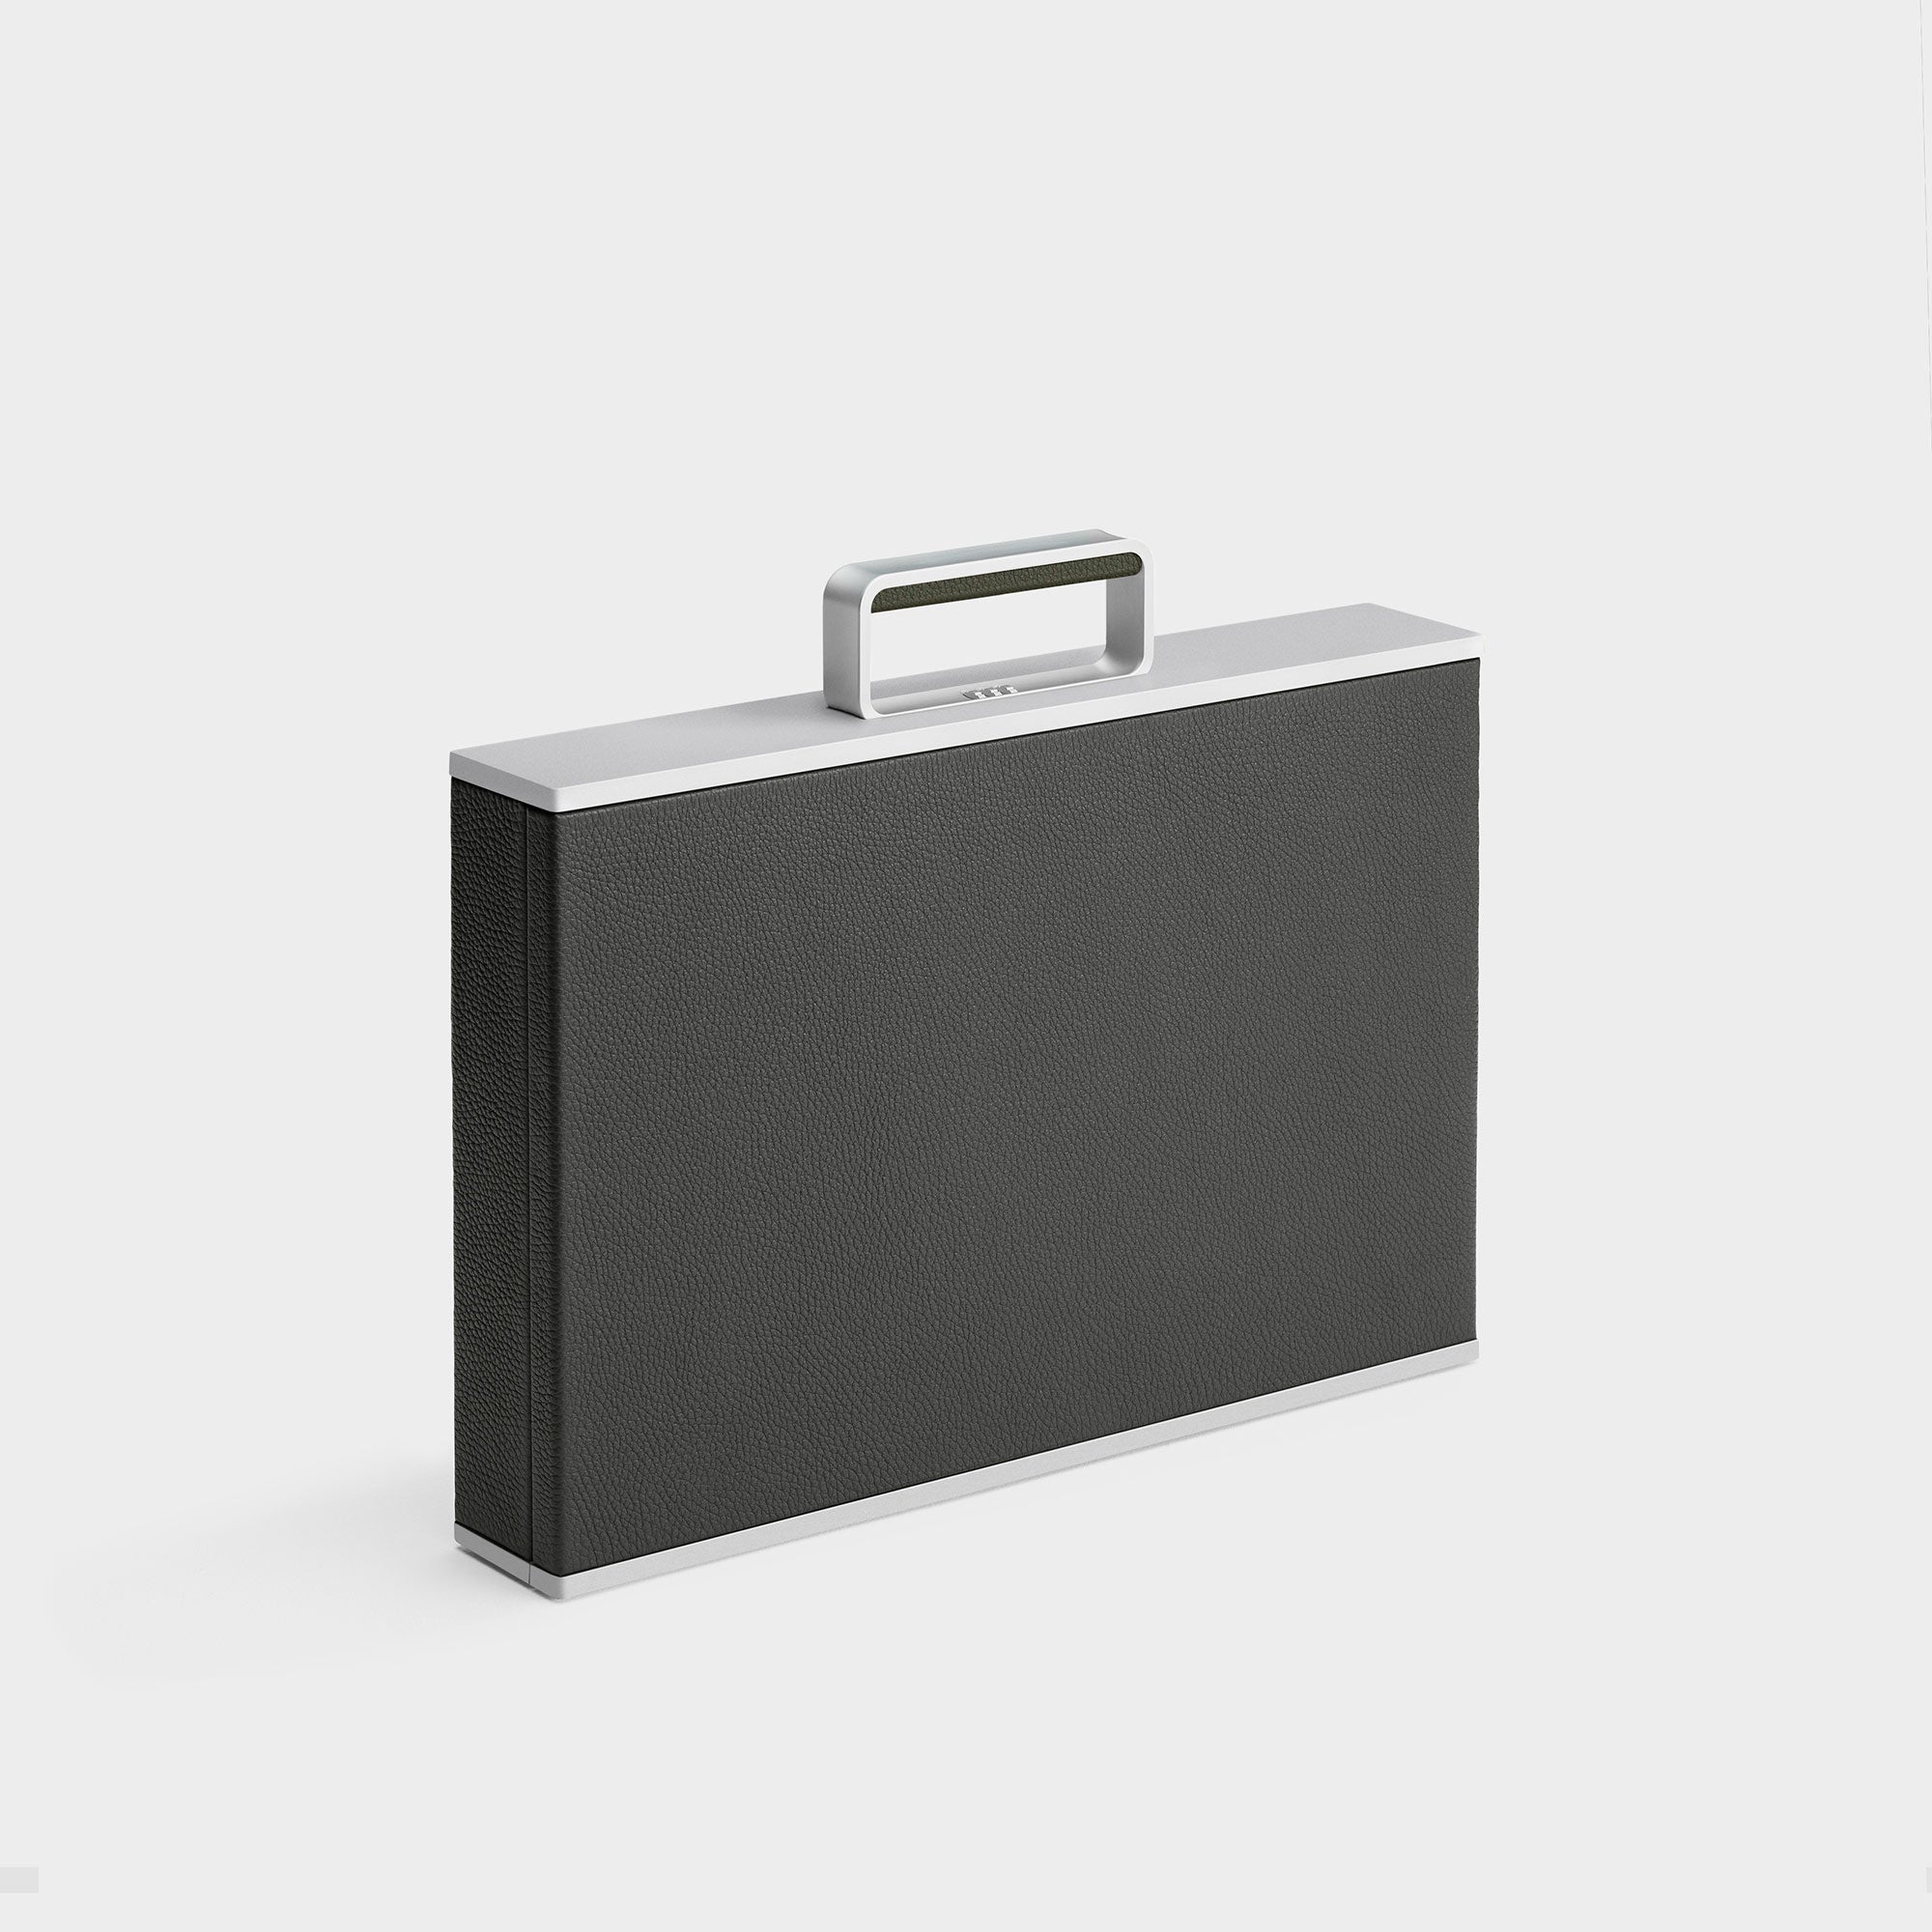 Designer watch briefcase for up to 10 watches. Handmade in Canada from graphite leather and Sea sand Alcantara interior